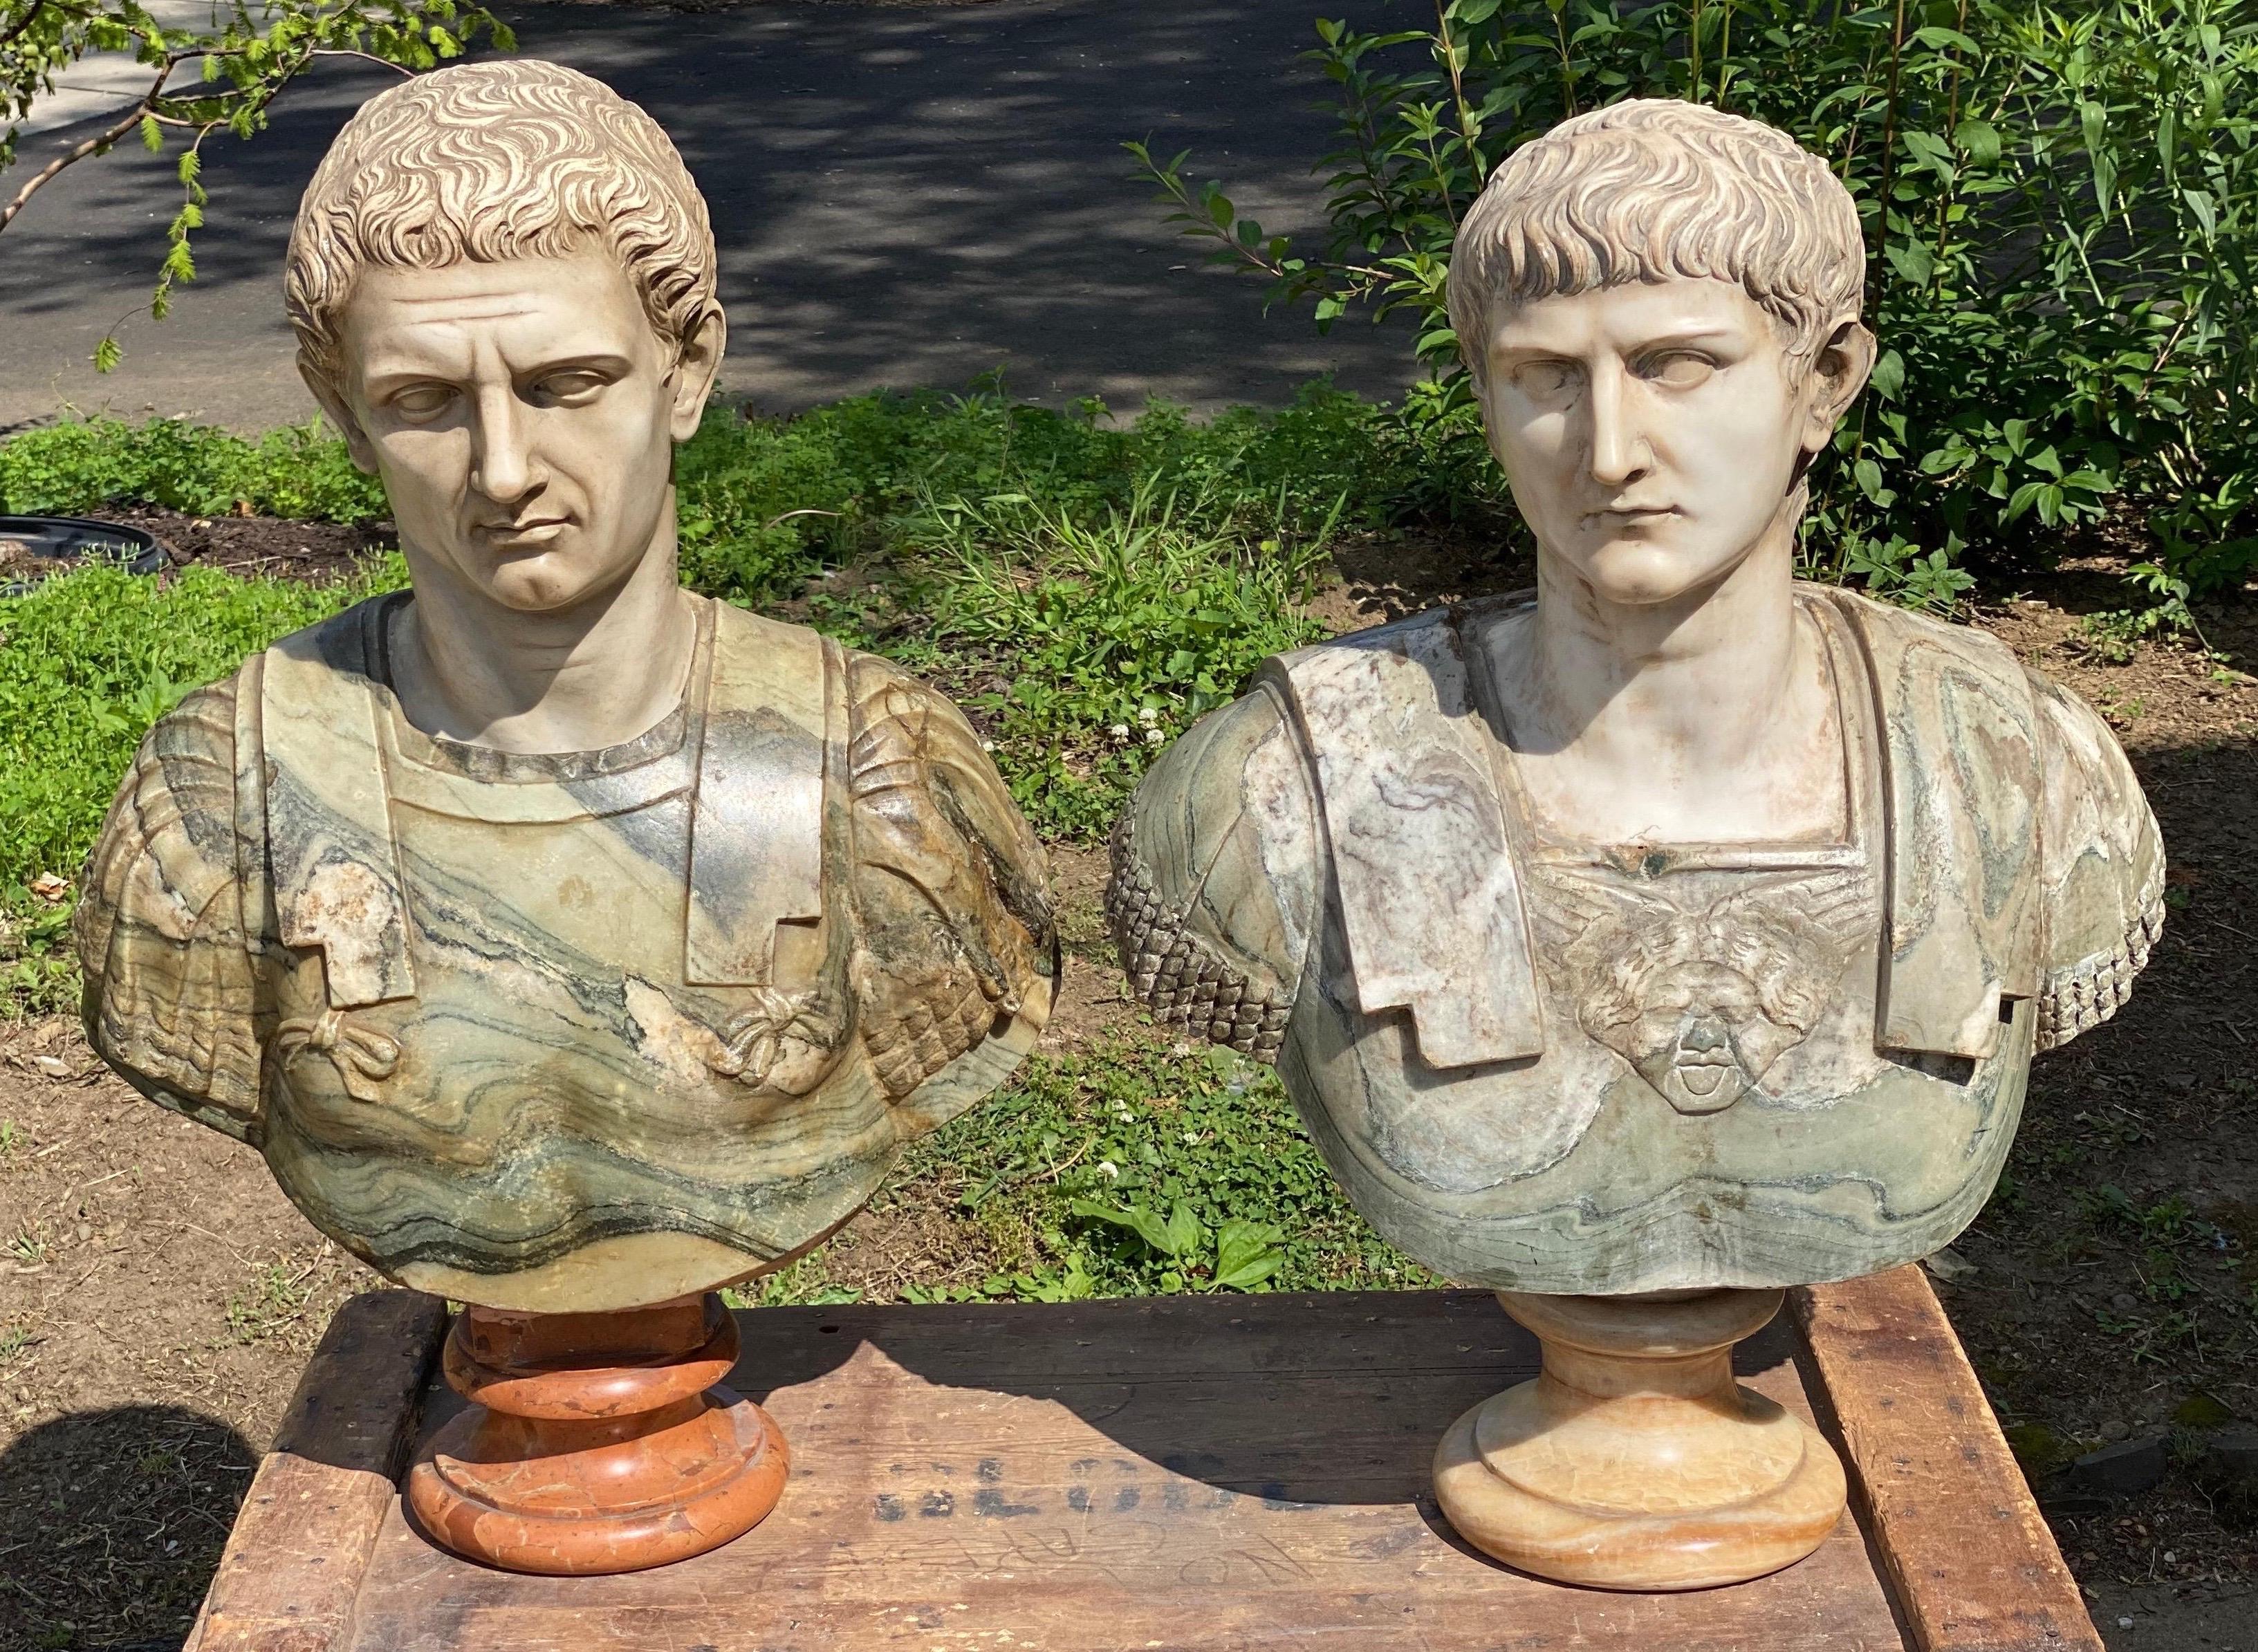 Incredible hand carved 19th century Italian specimen marble busts of Julius Caesar and Mark Anthony.

The life like faces are impeccably carved in white marble. These truly stunning busts were clearly carved by a master artisan. Take special note of